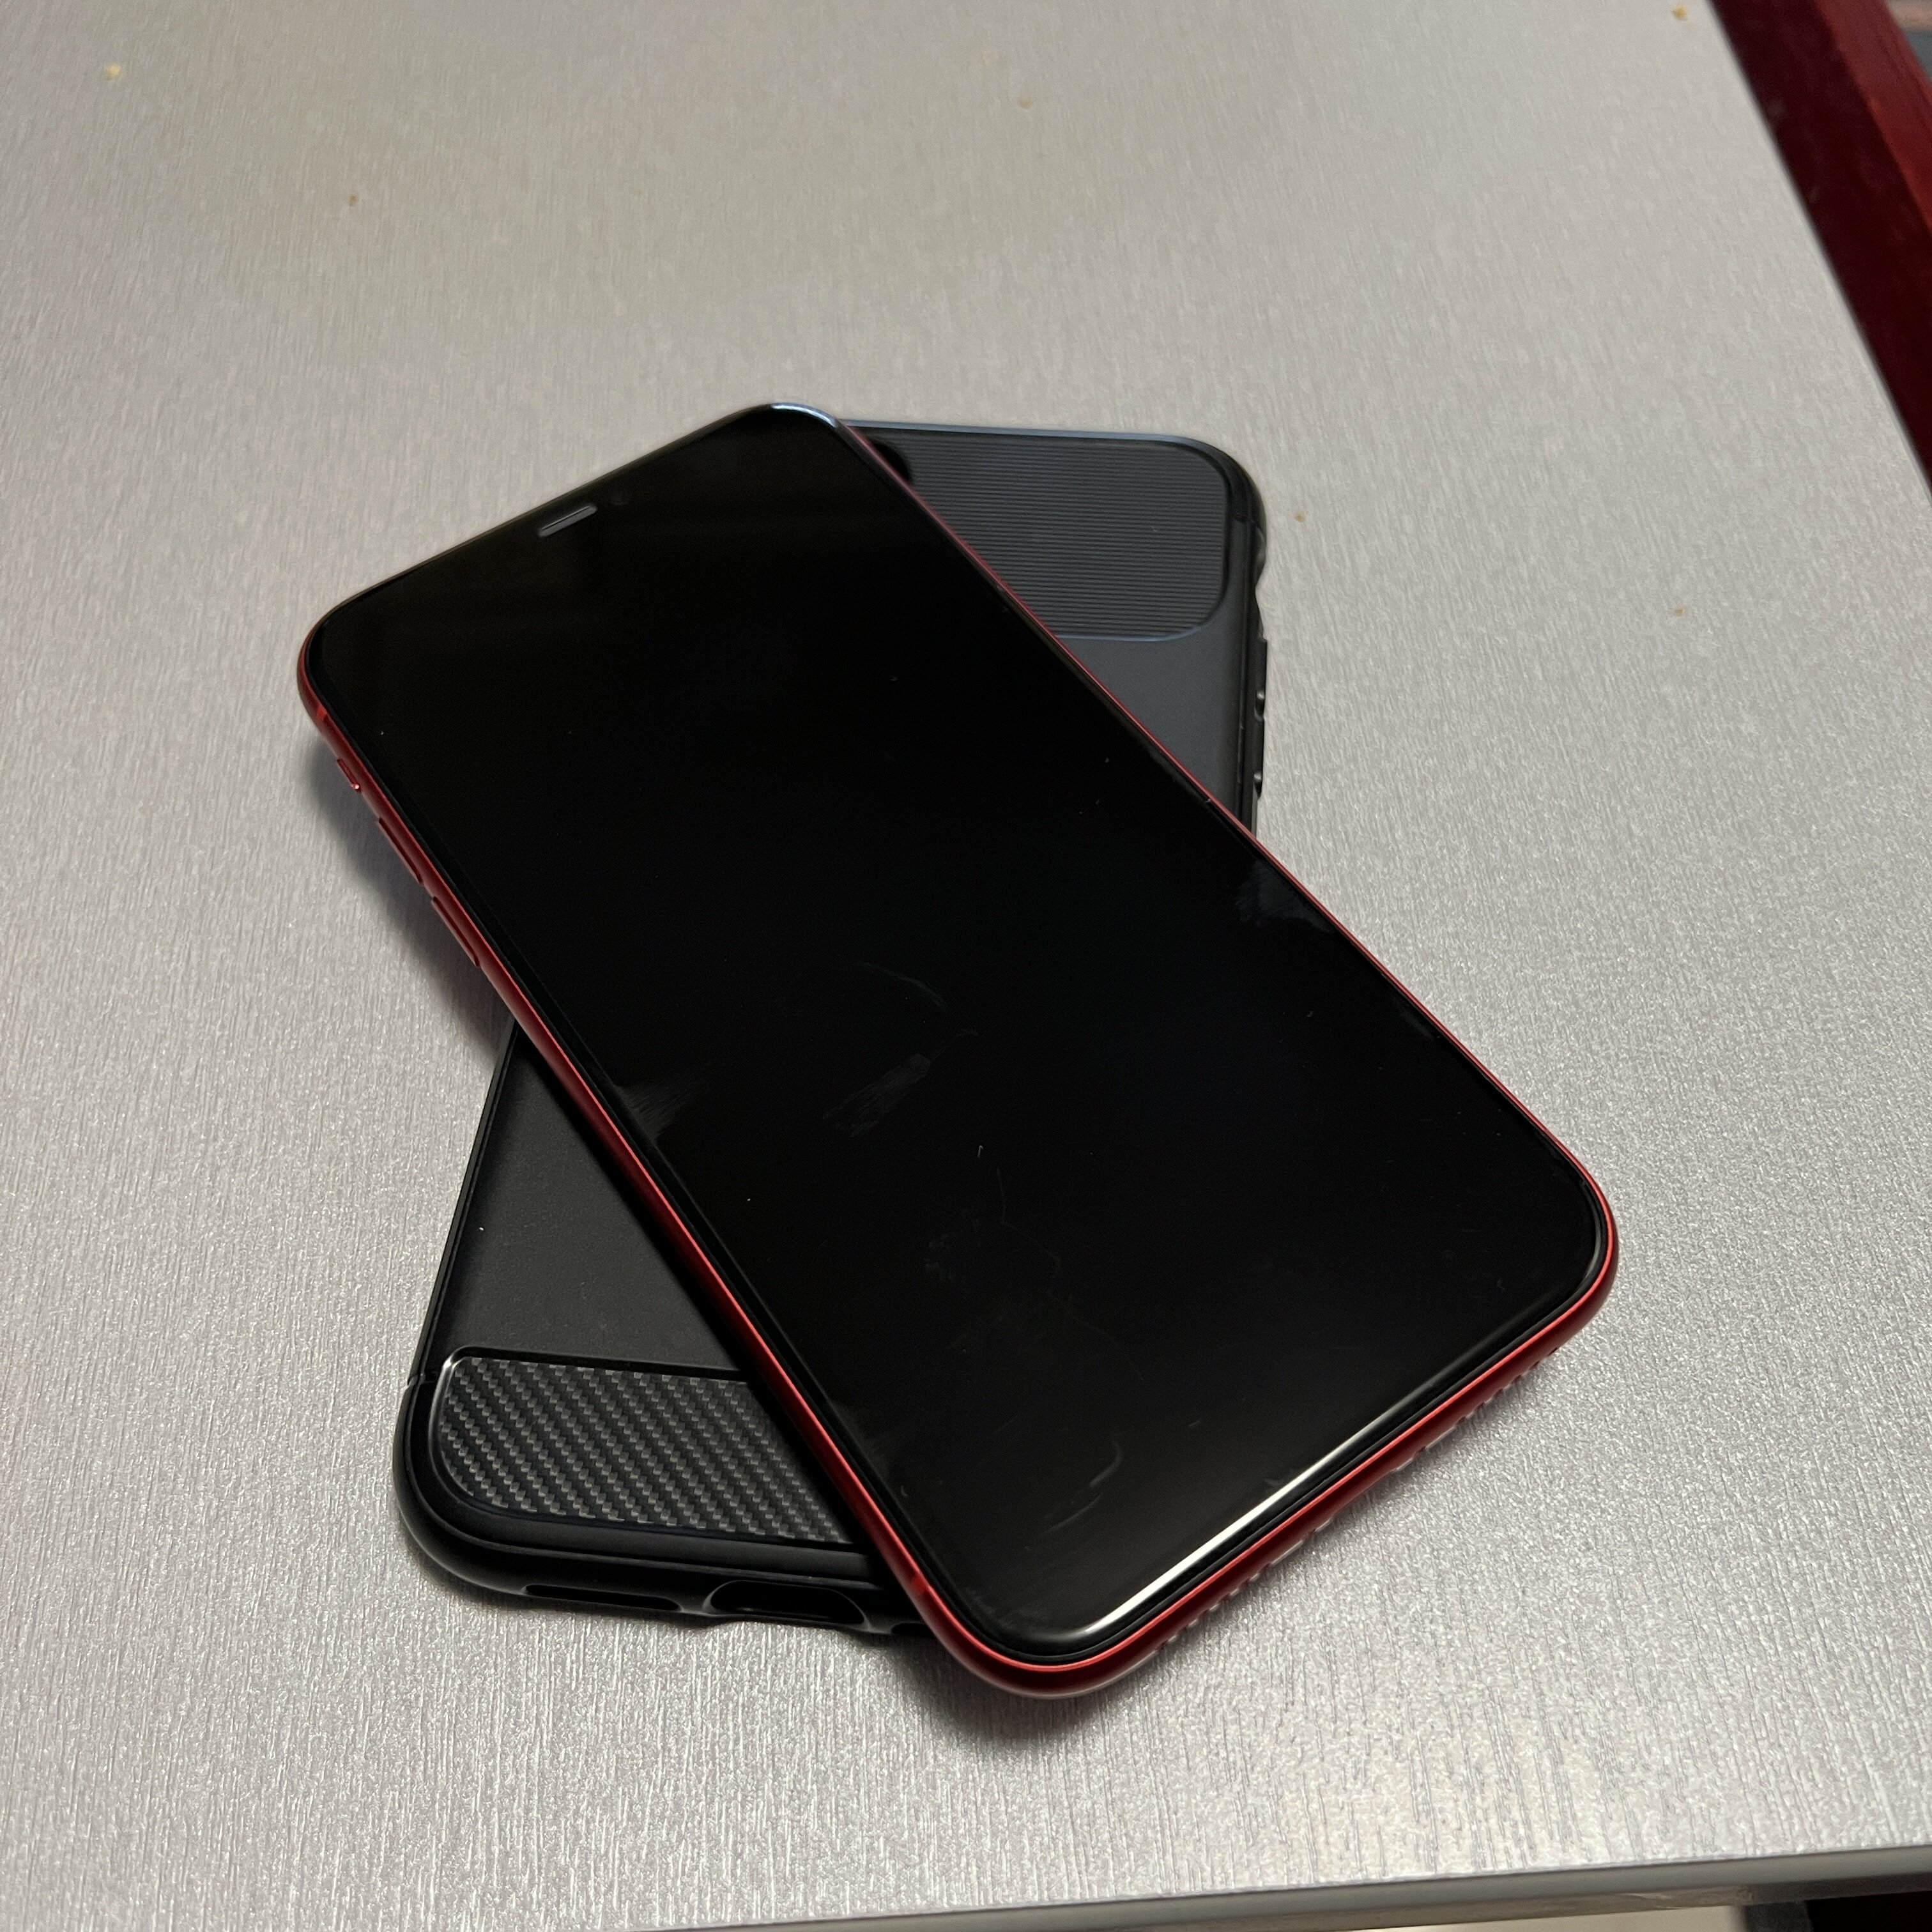 iPhone 11 64 GB product red - iPhone - Insomnia.gr